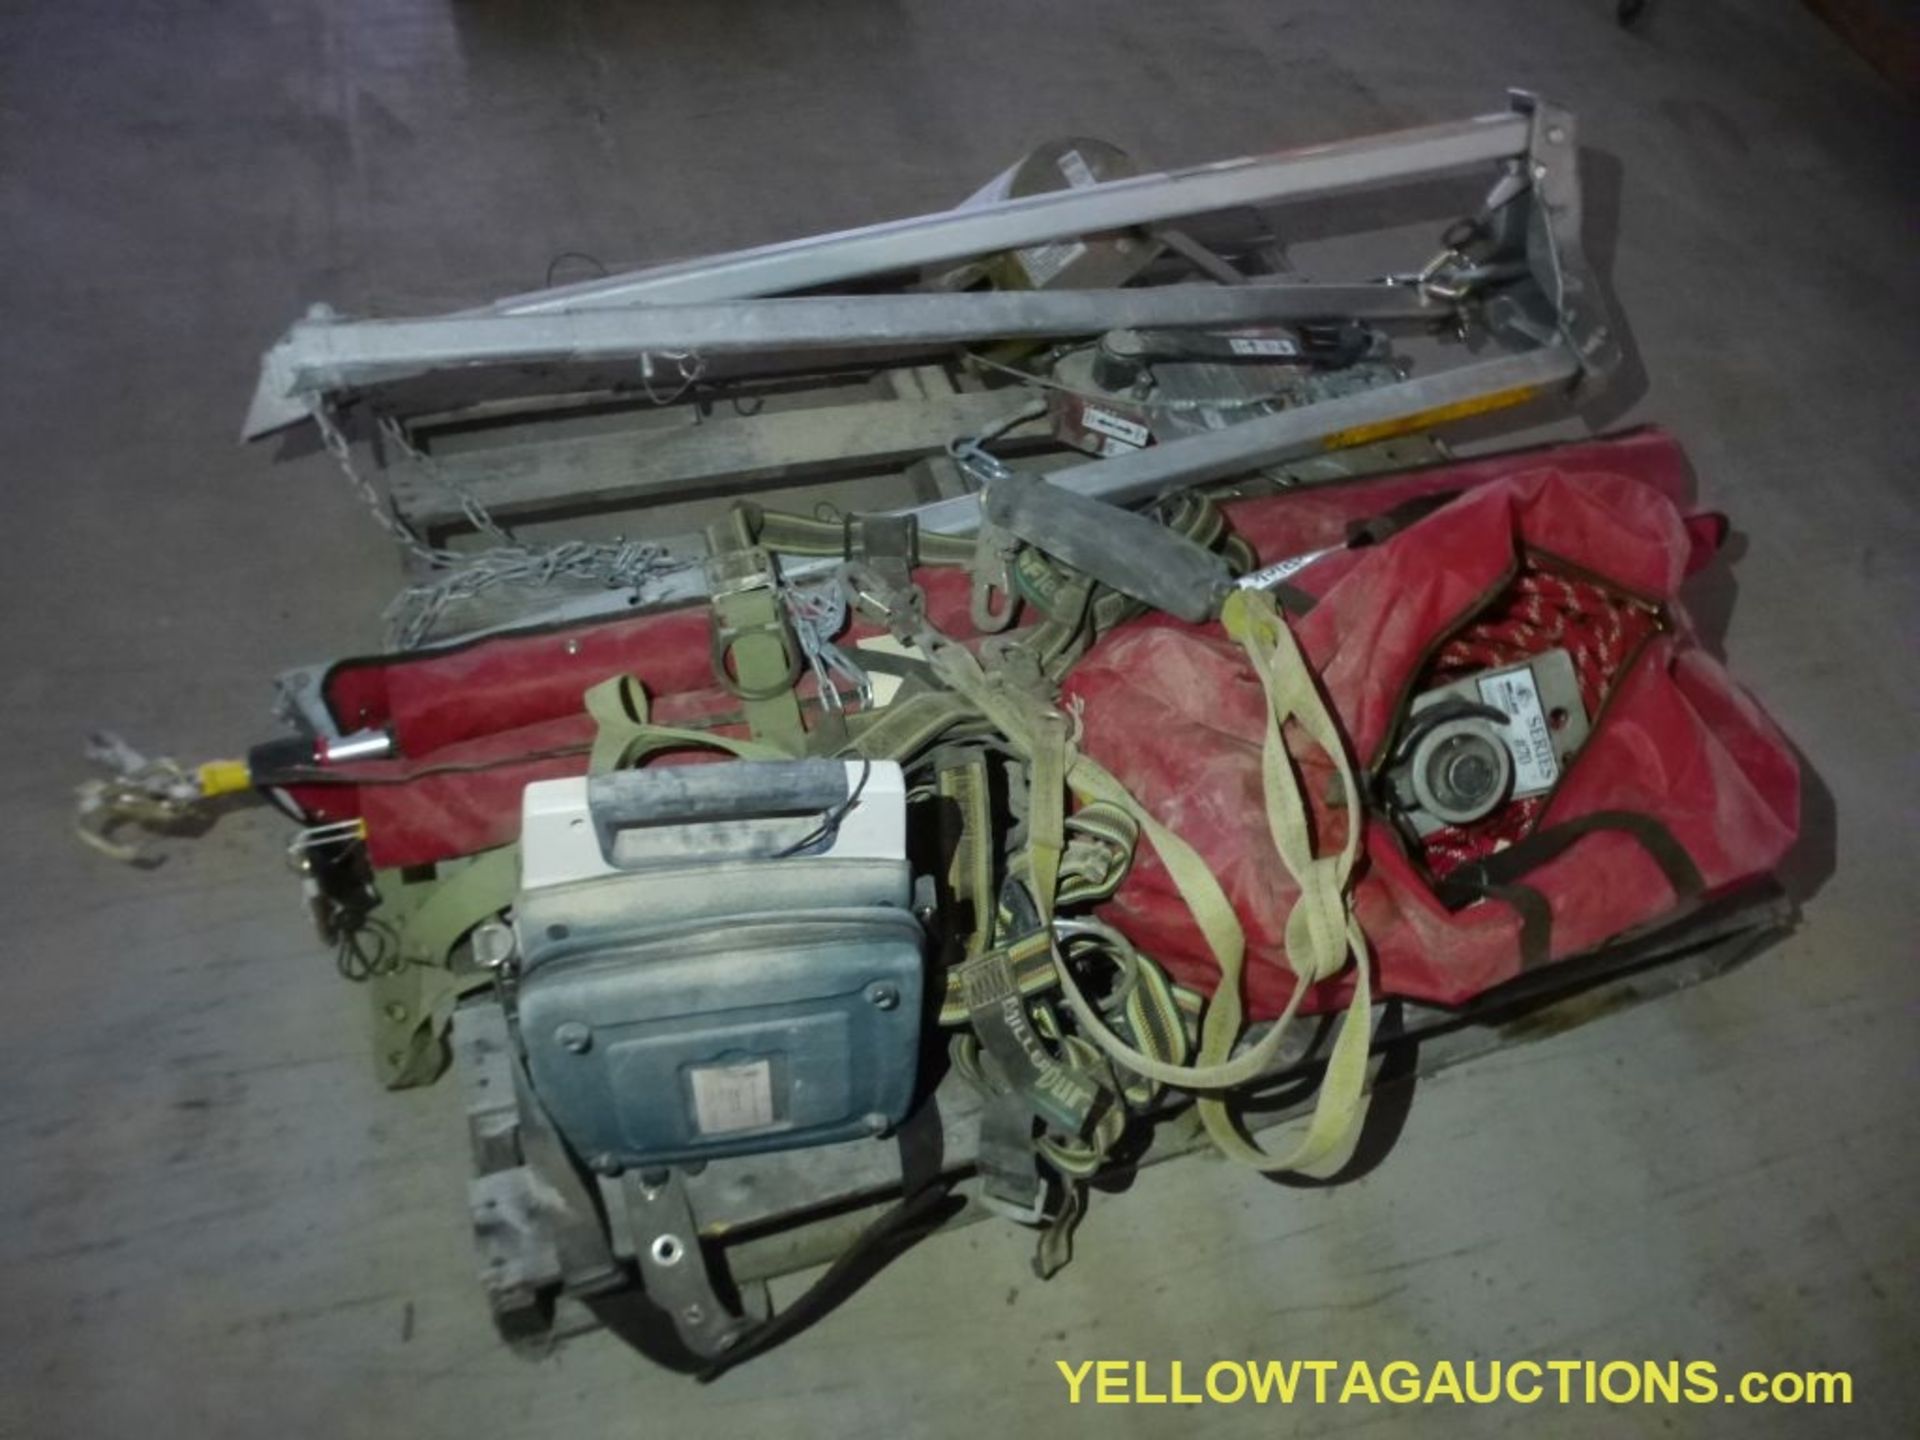 Lot of Assorted Safety Fall Protection - Brands Include: AED, etc. - Image 2 of 8